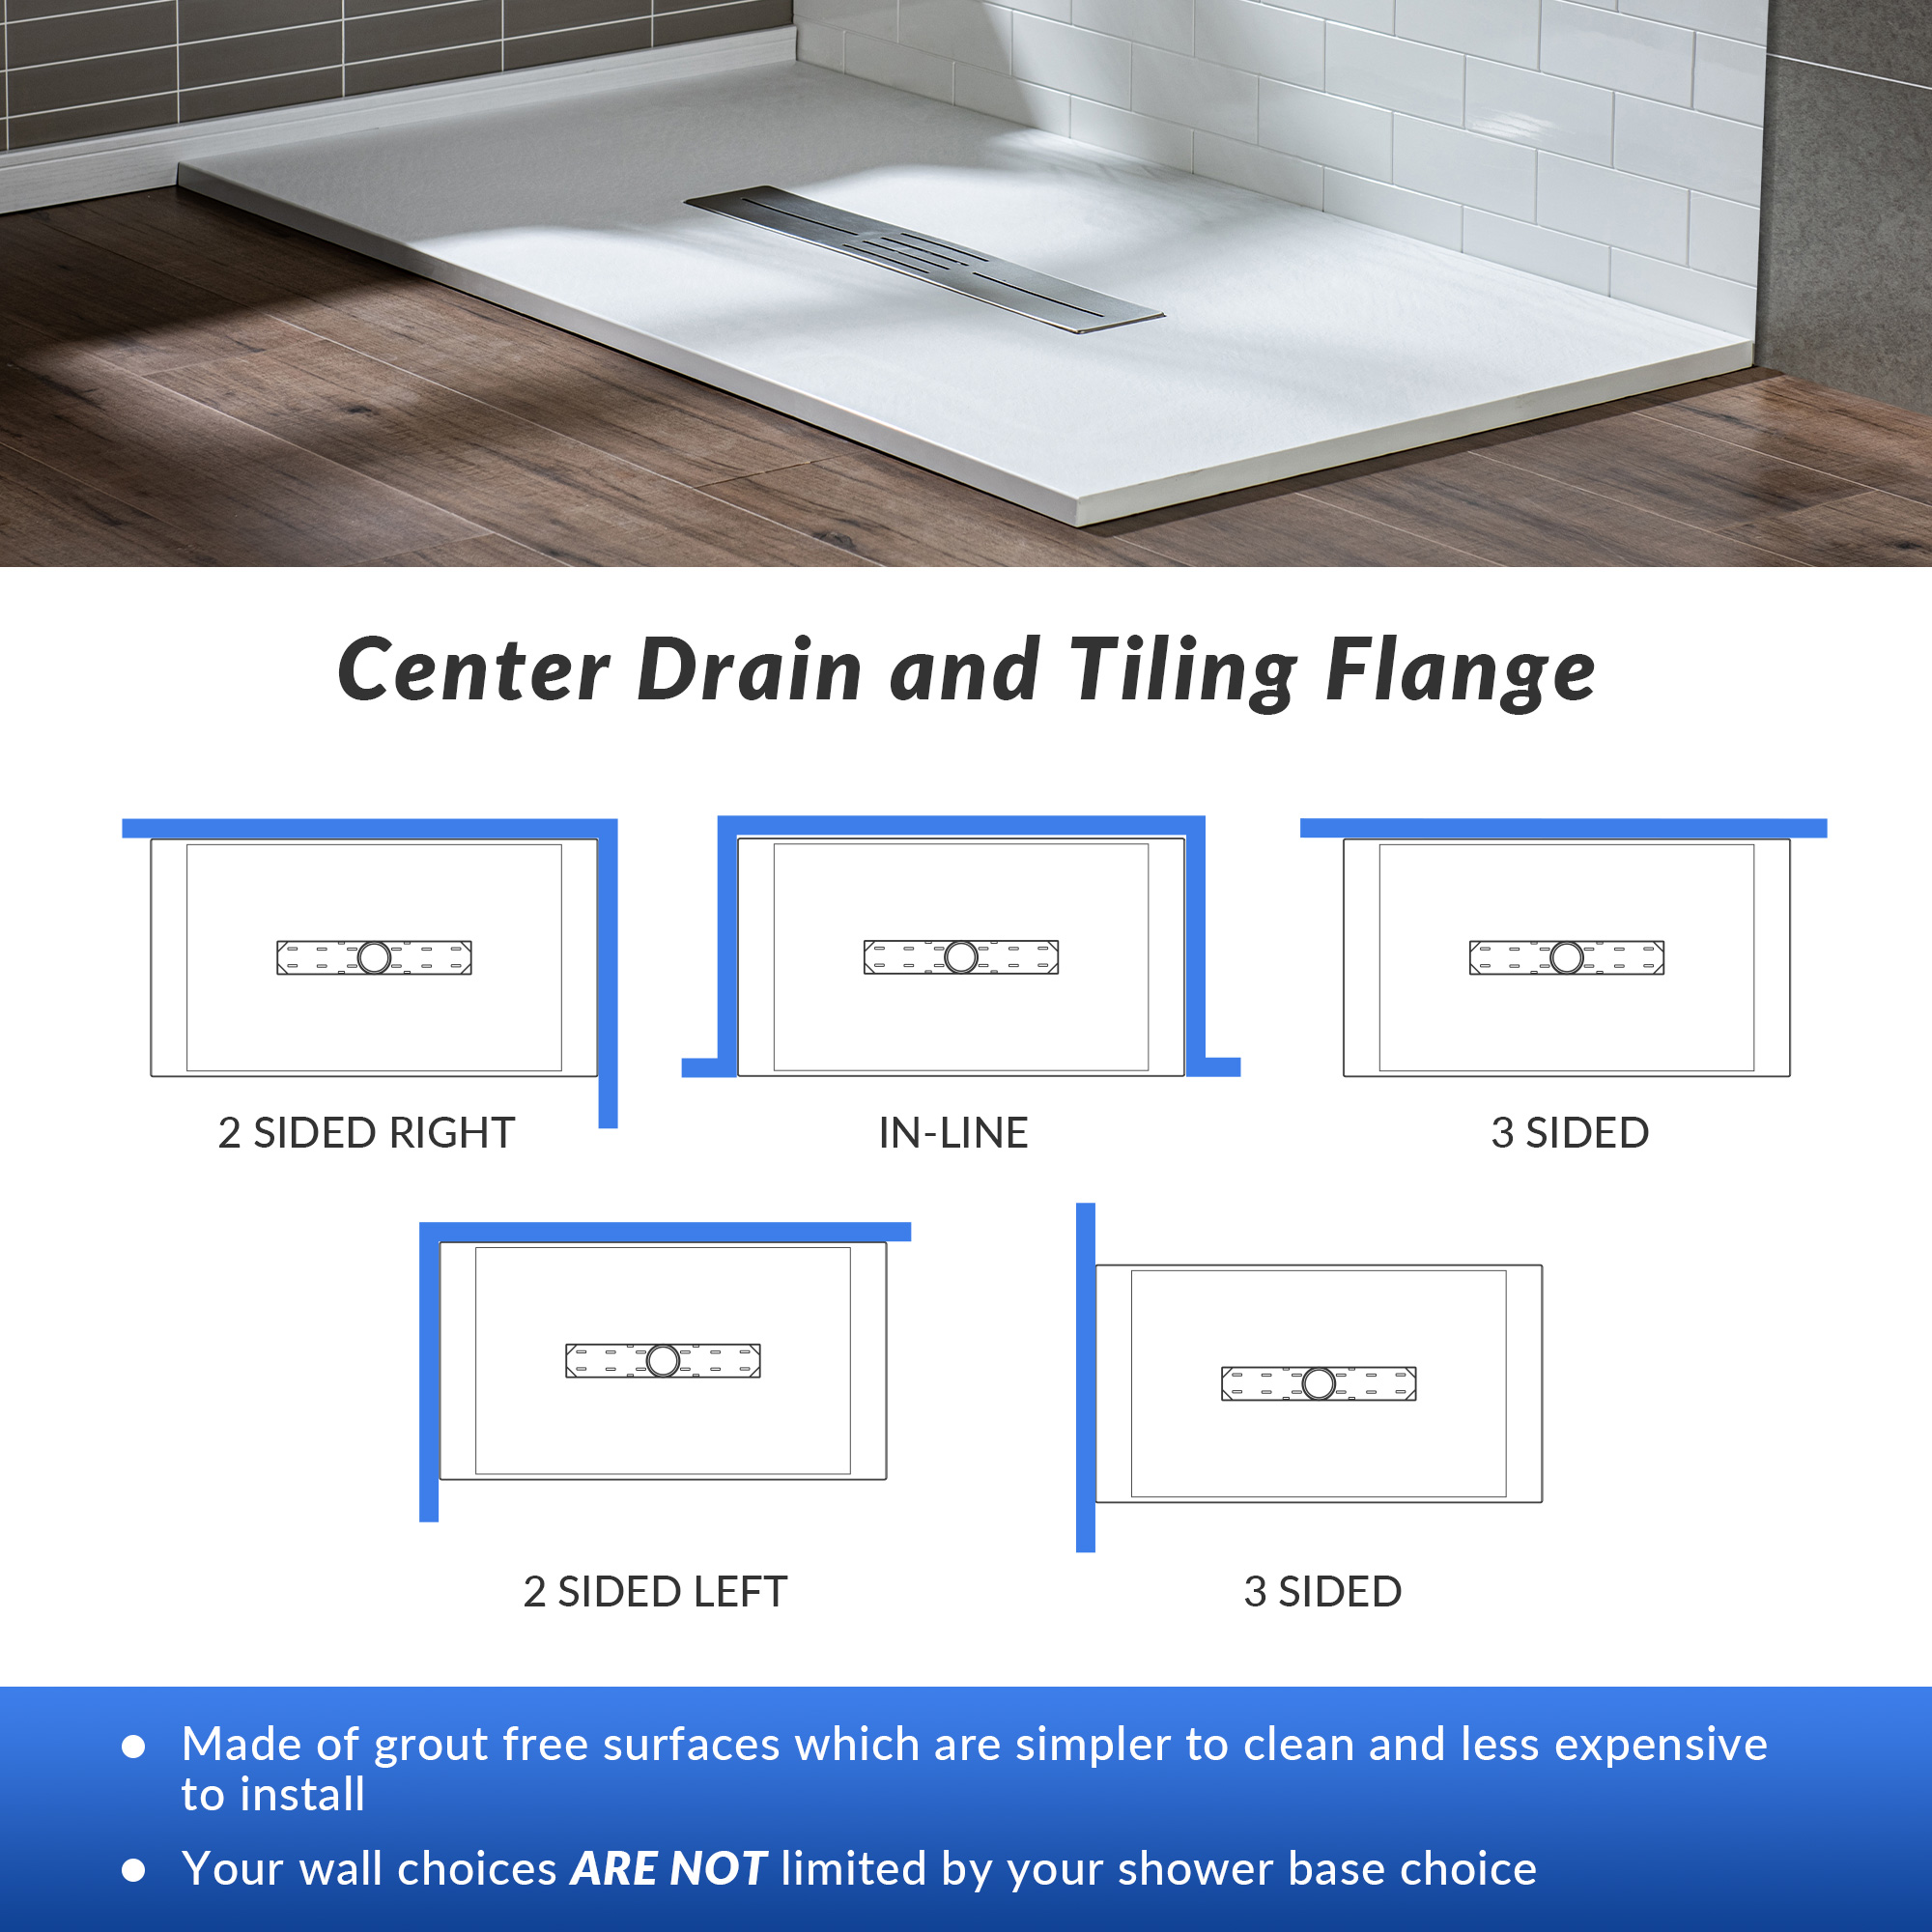  WOODBRIDGE 48-in L x 32-in W Zero Threshold End Drain Shower Base with Center Drain Placement, Matching Decorative Drain Plate and Tile Flange, Wheel Chair Access, Low Profile, White_15113